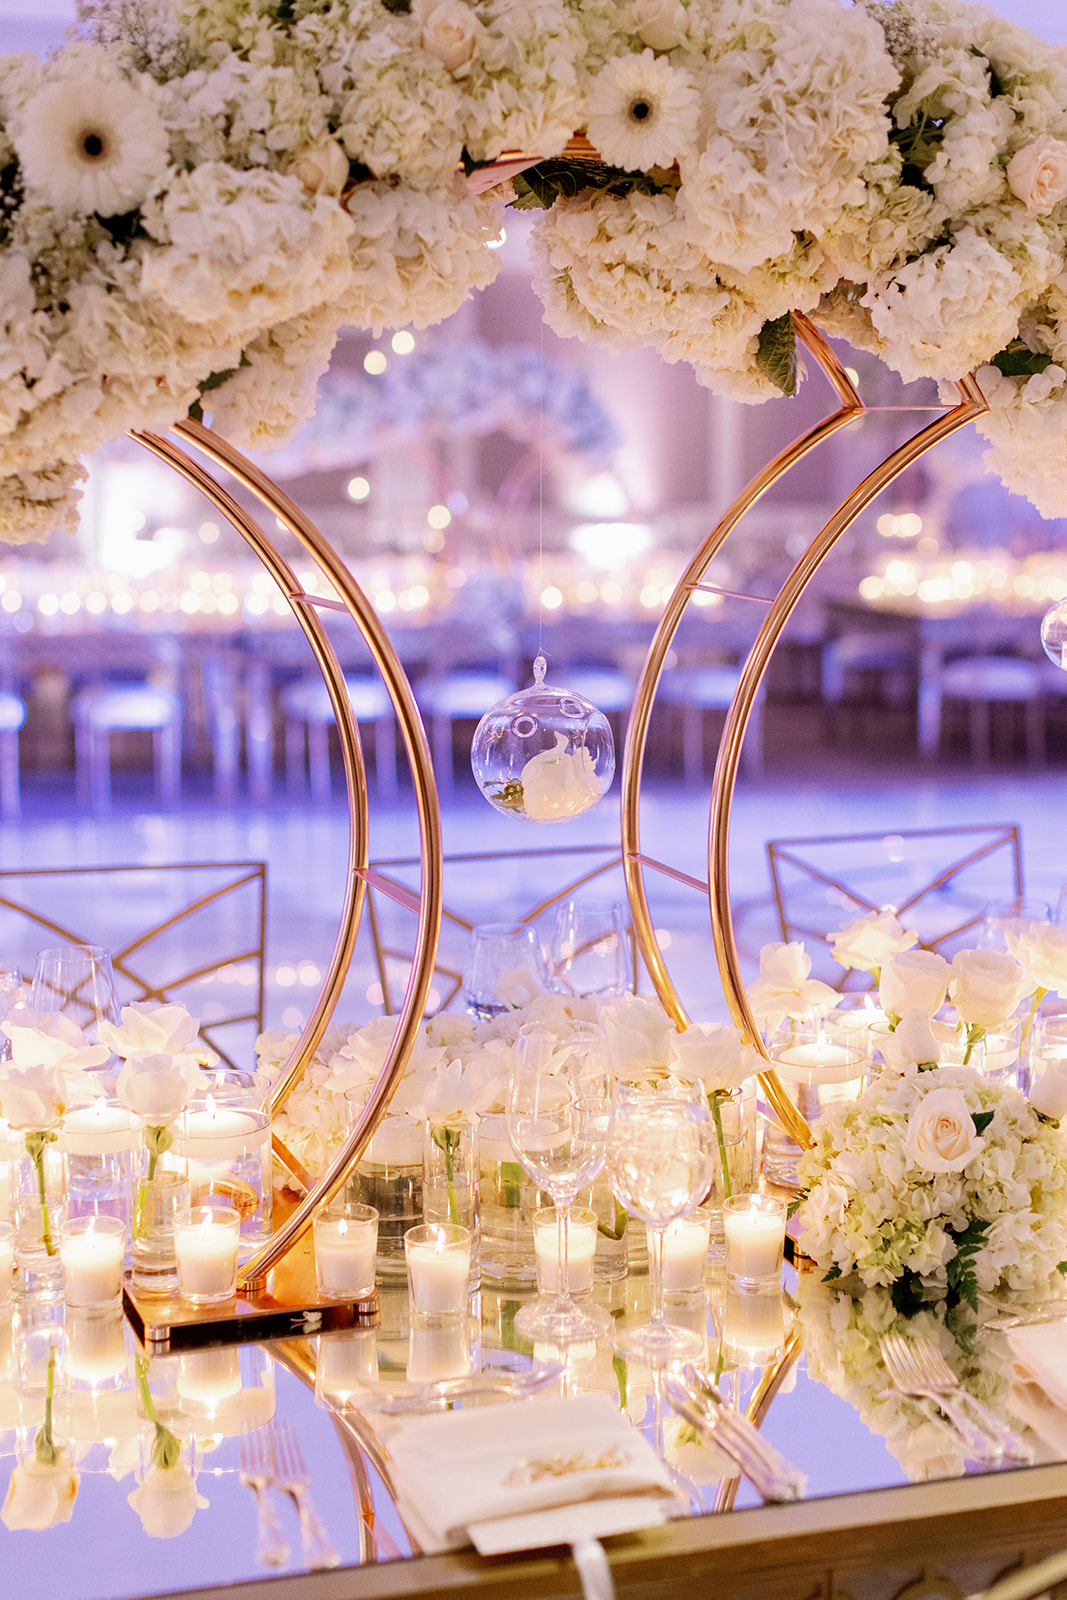 Glam wedding floral table centerpiece with candles in glass orbs. 